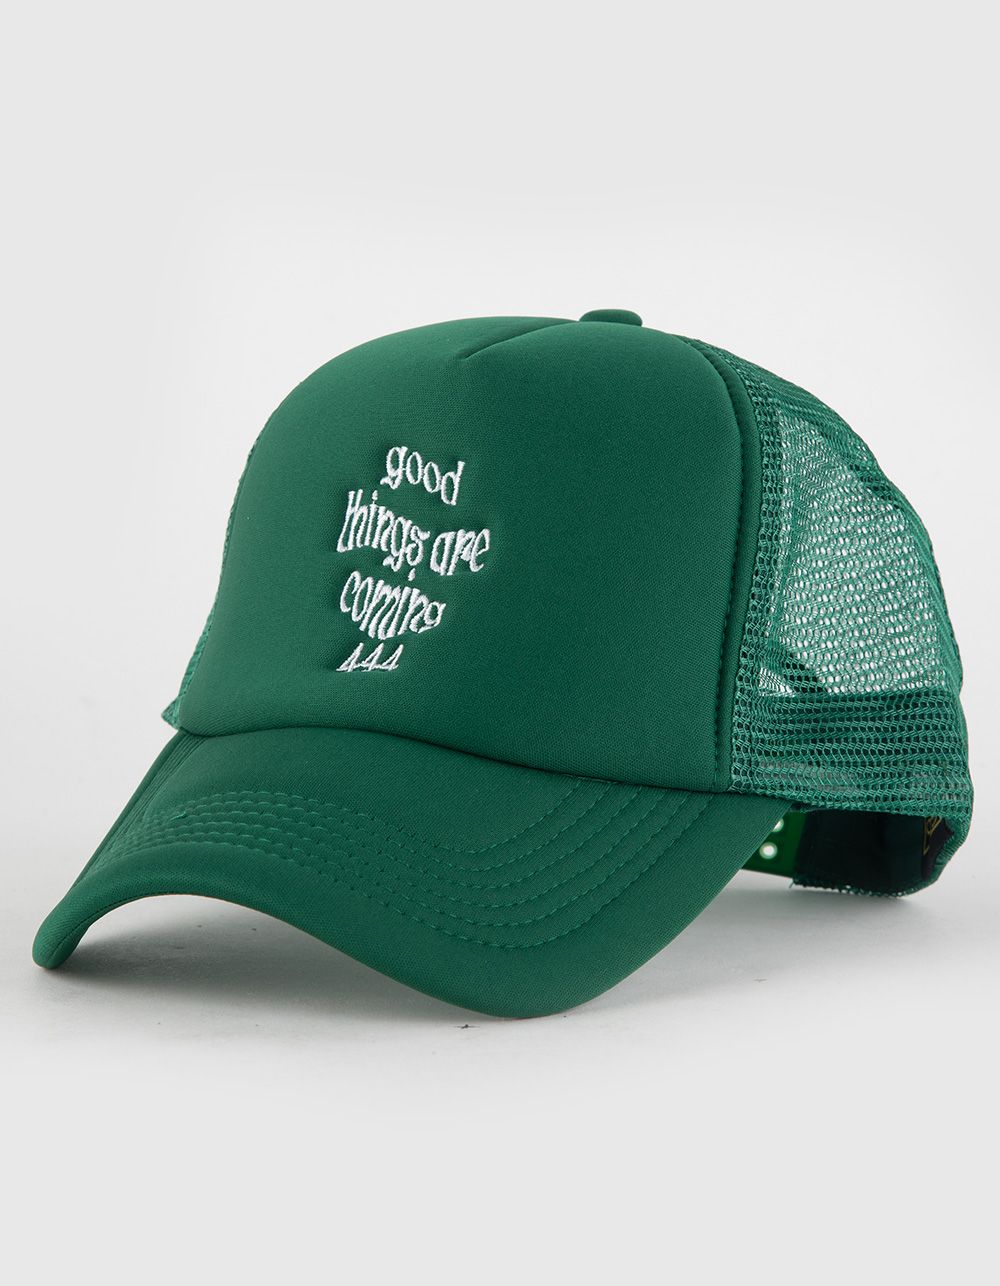 Good Things Are Coming 444 Womens Trucker Hat | Tillys